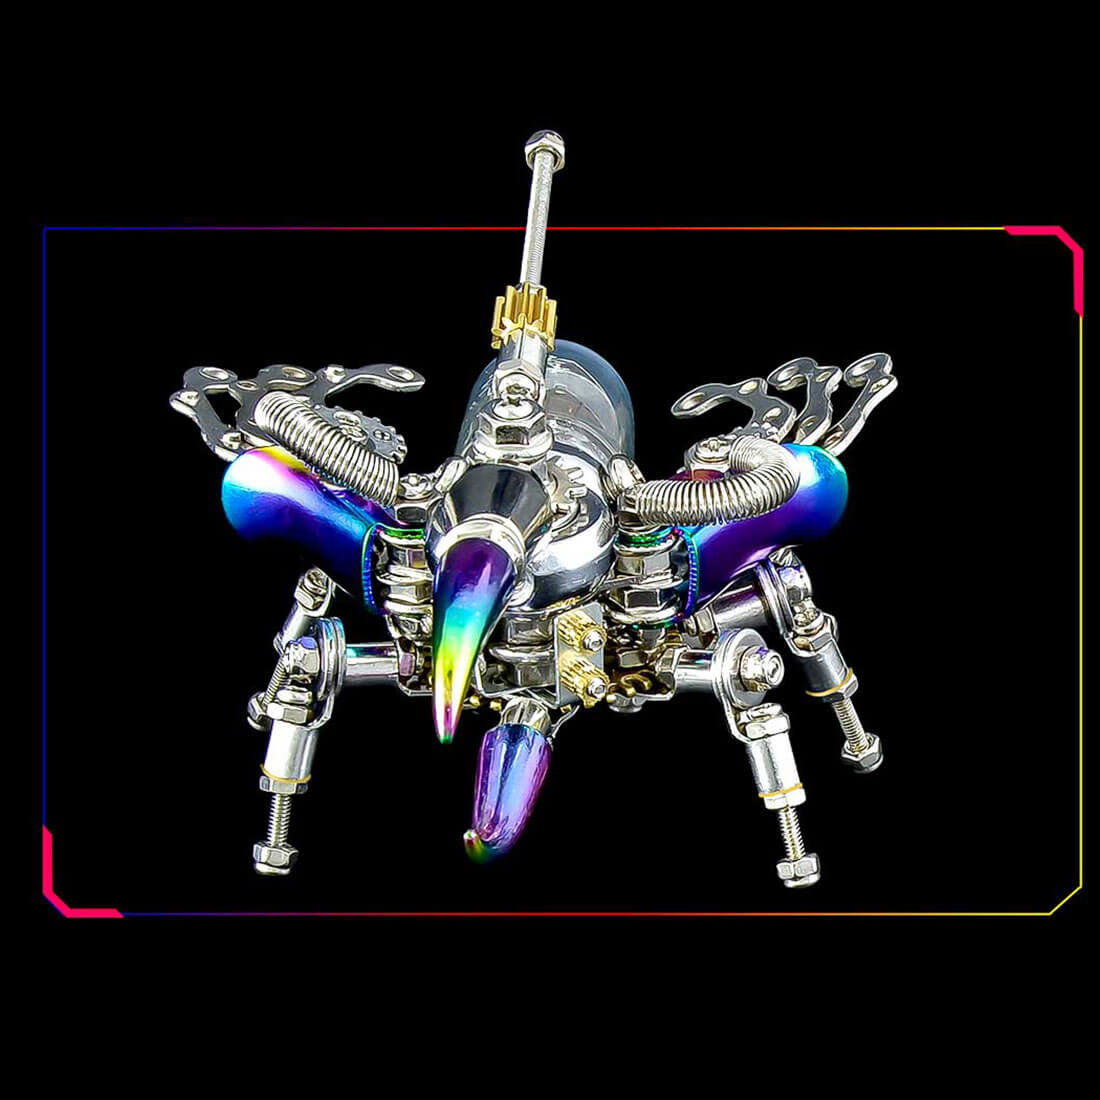 Punk Rhinoceros Beetle 3D Metal Puzzle Insect DIY Kits with Light